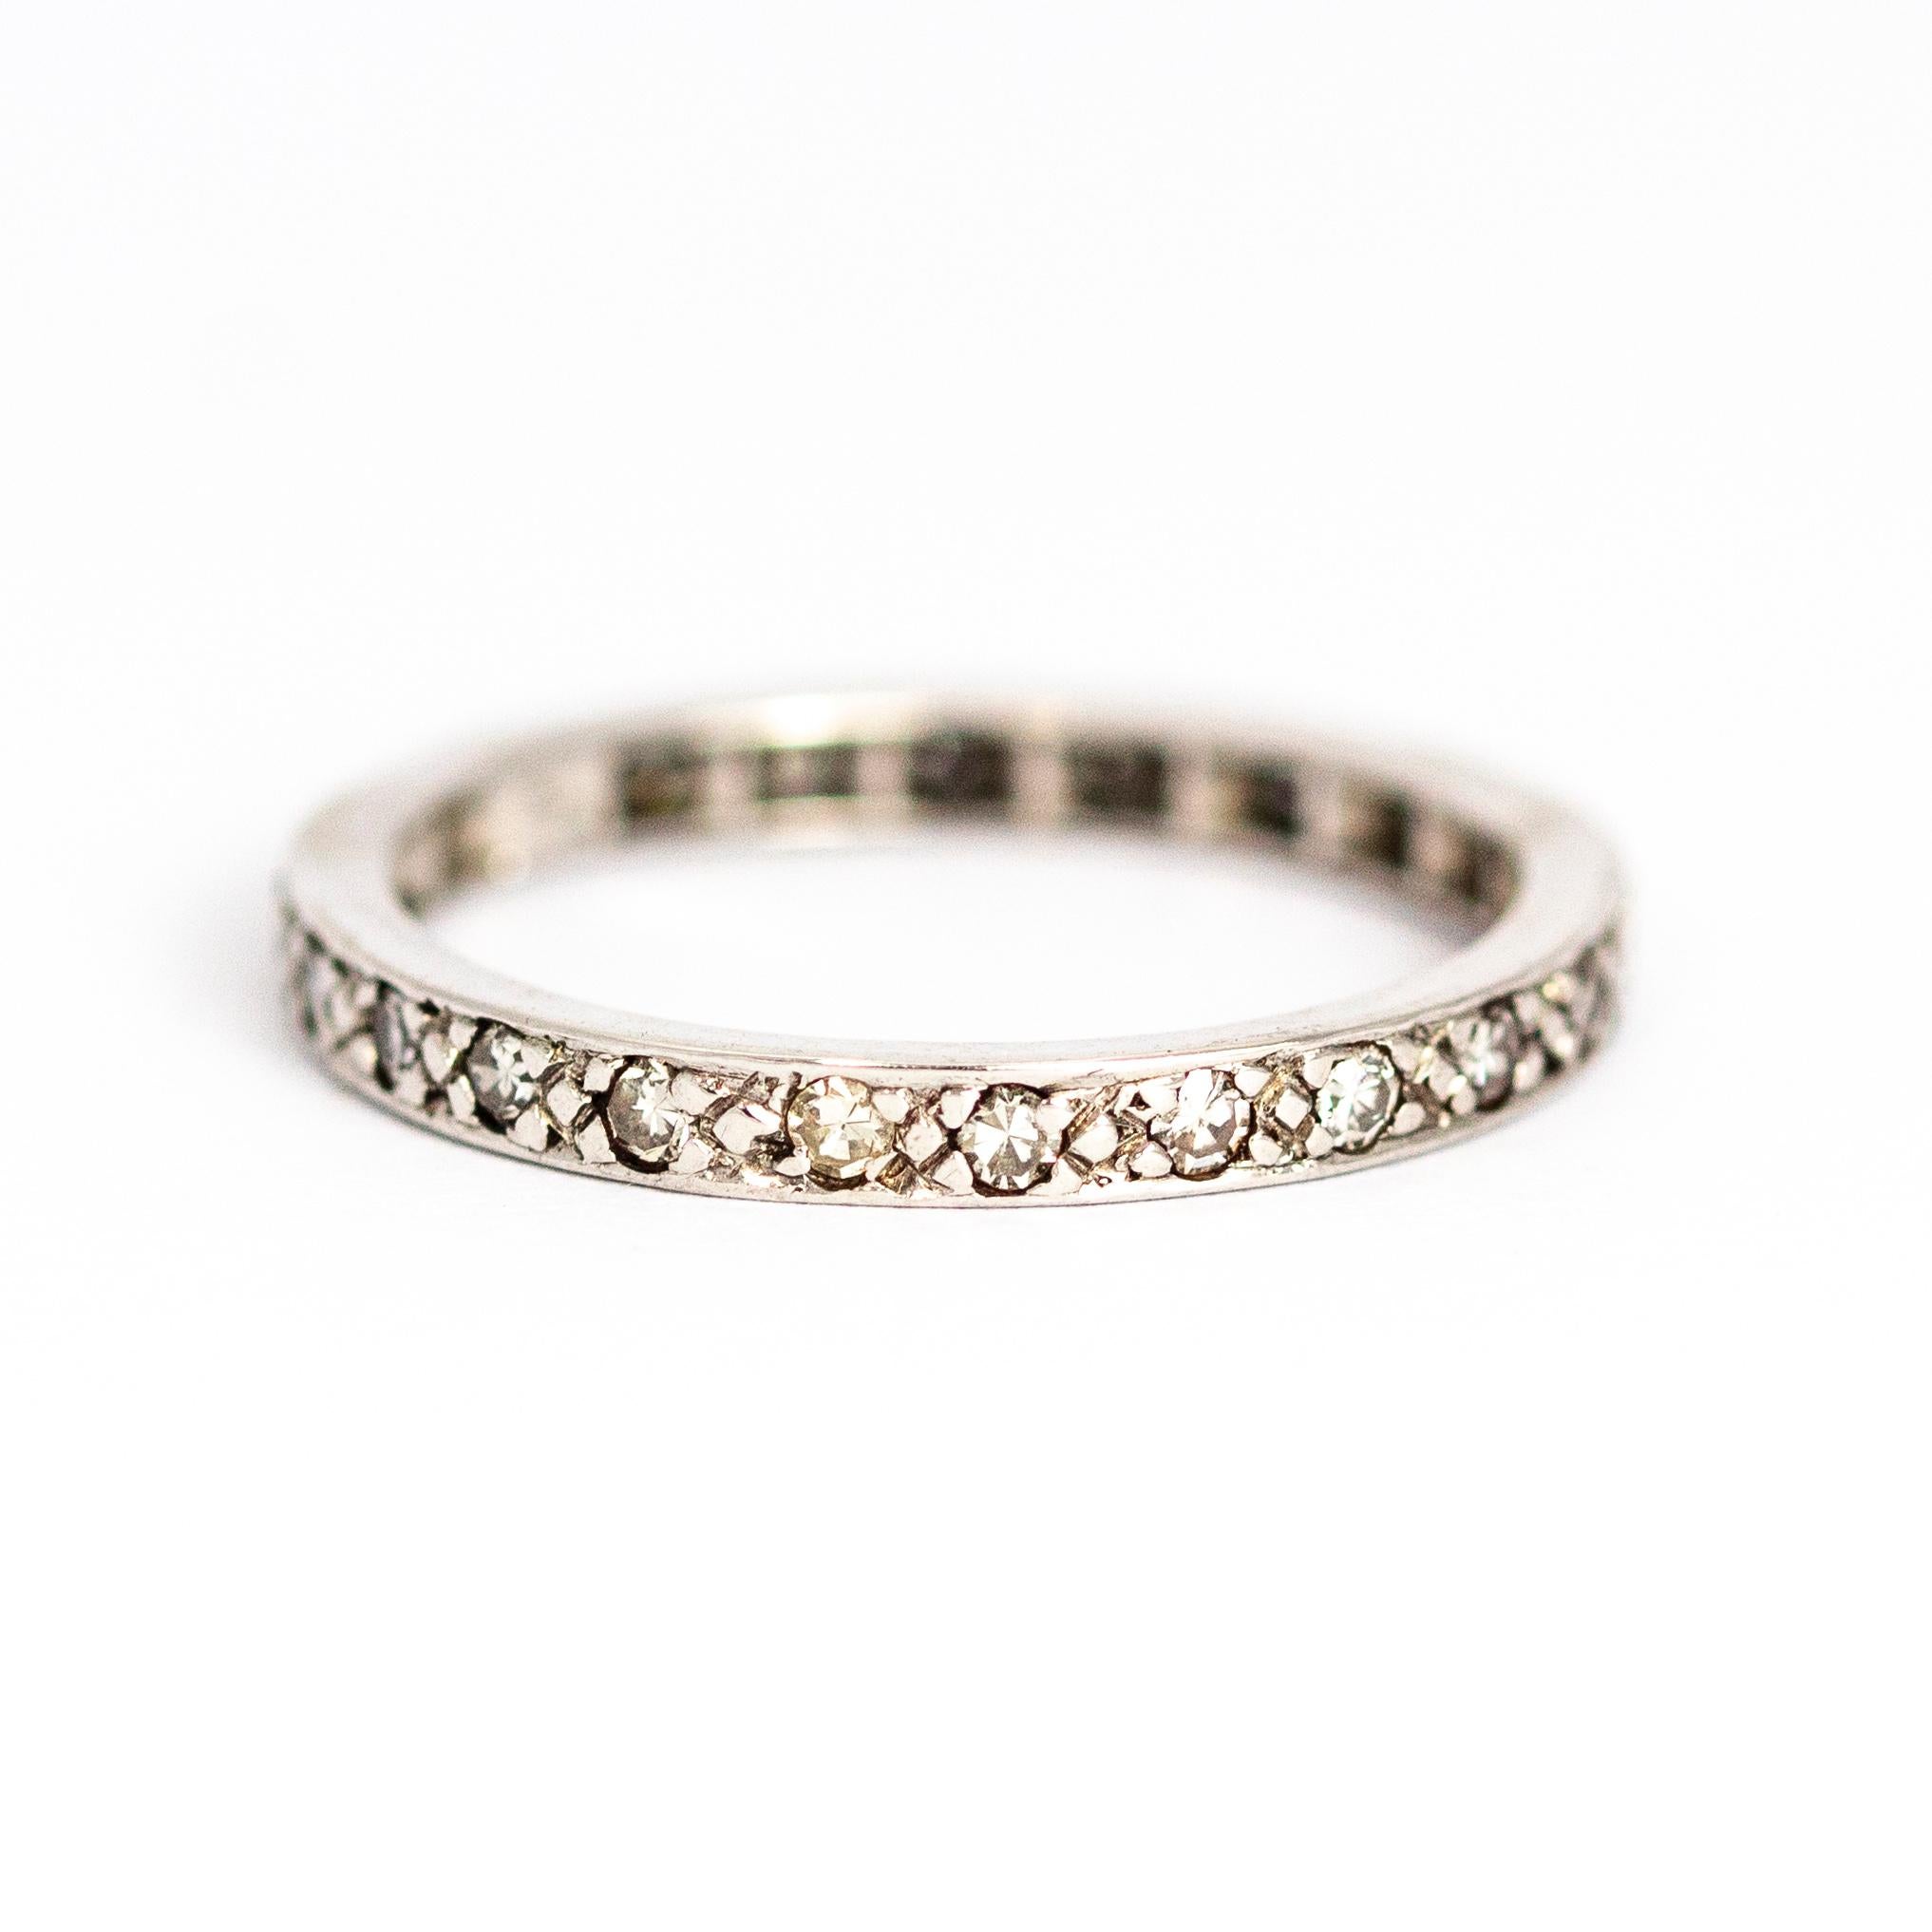 Vintage 18 Carat White Gold Diamond Full Eternity Band In Good Condition For Sale In Chipping Campden, GB